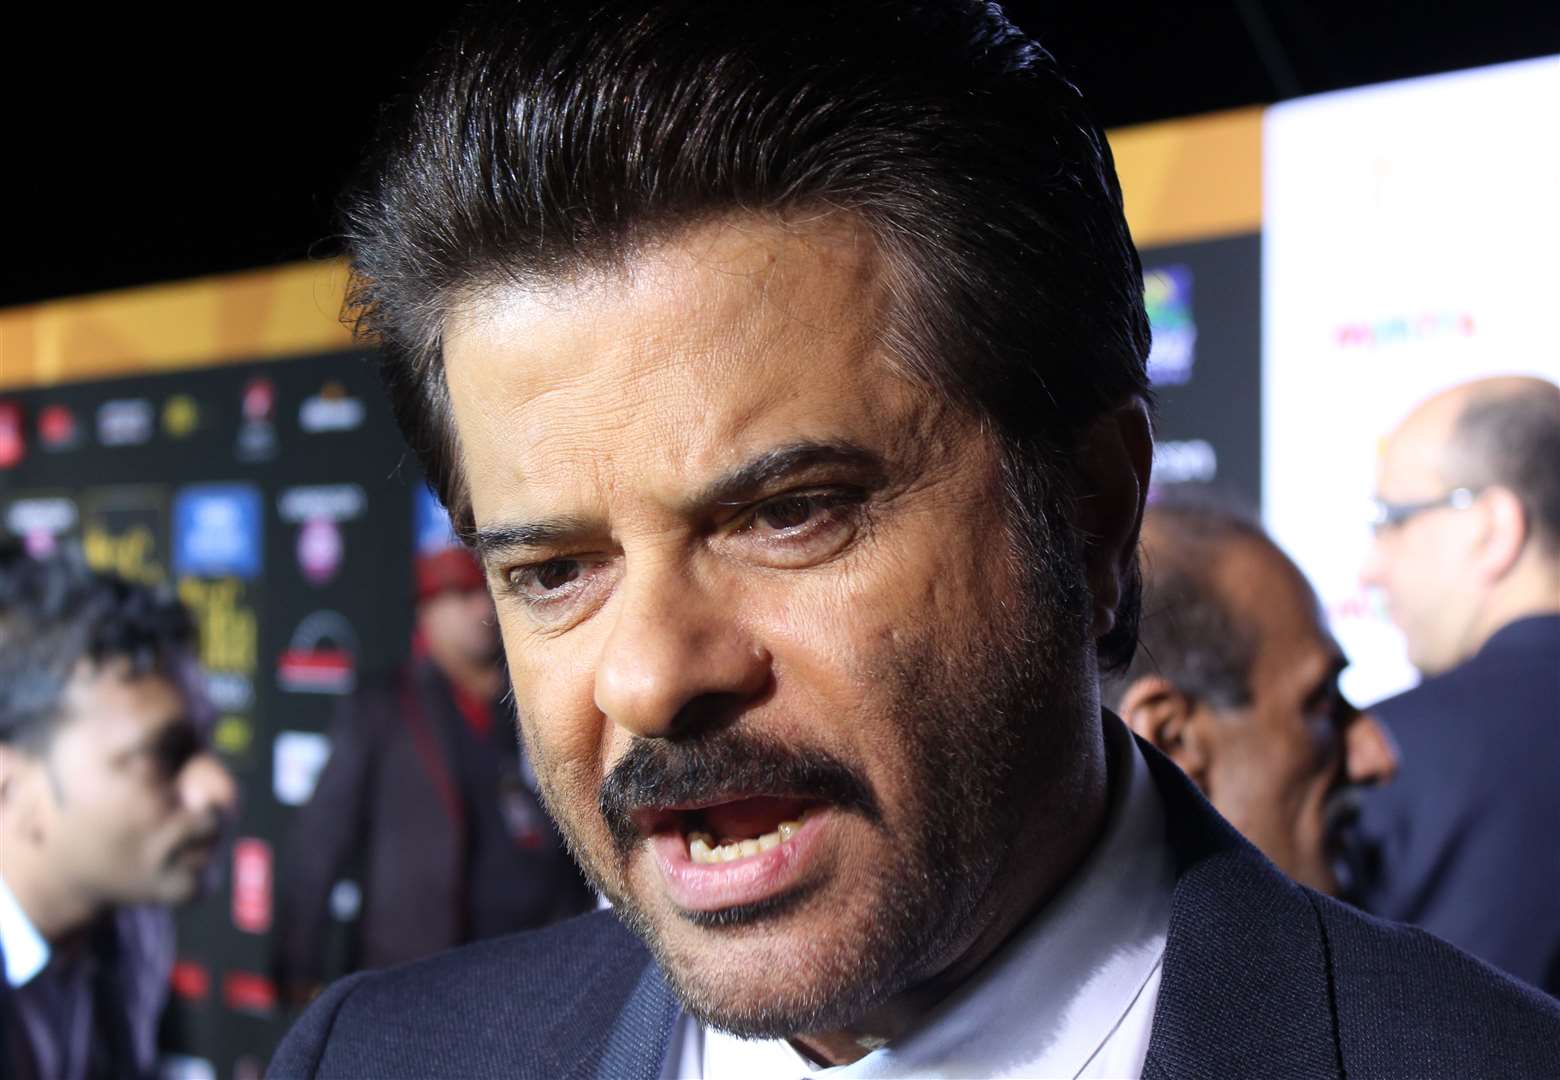 Anil Kapoor, who starred in Slumdog Millionaire and 24, will star in the movie shooting in Faversham (7960578)